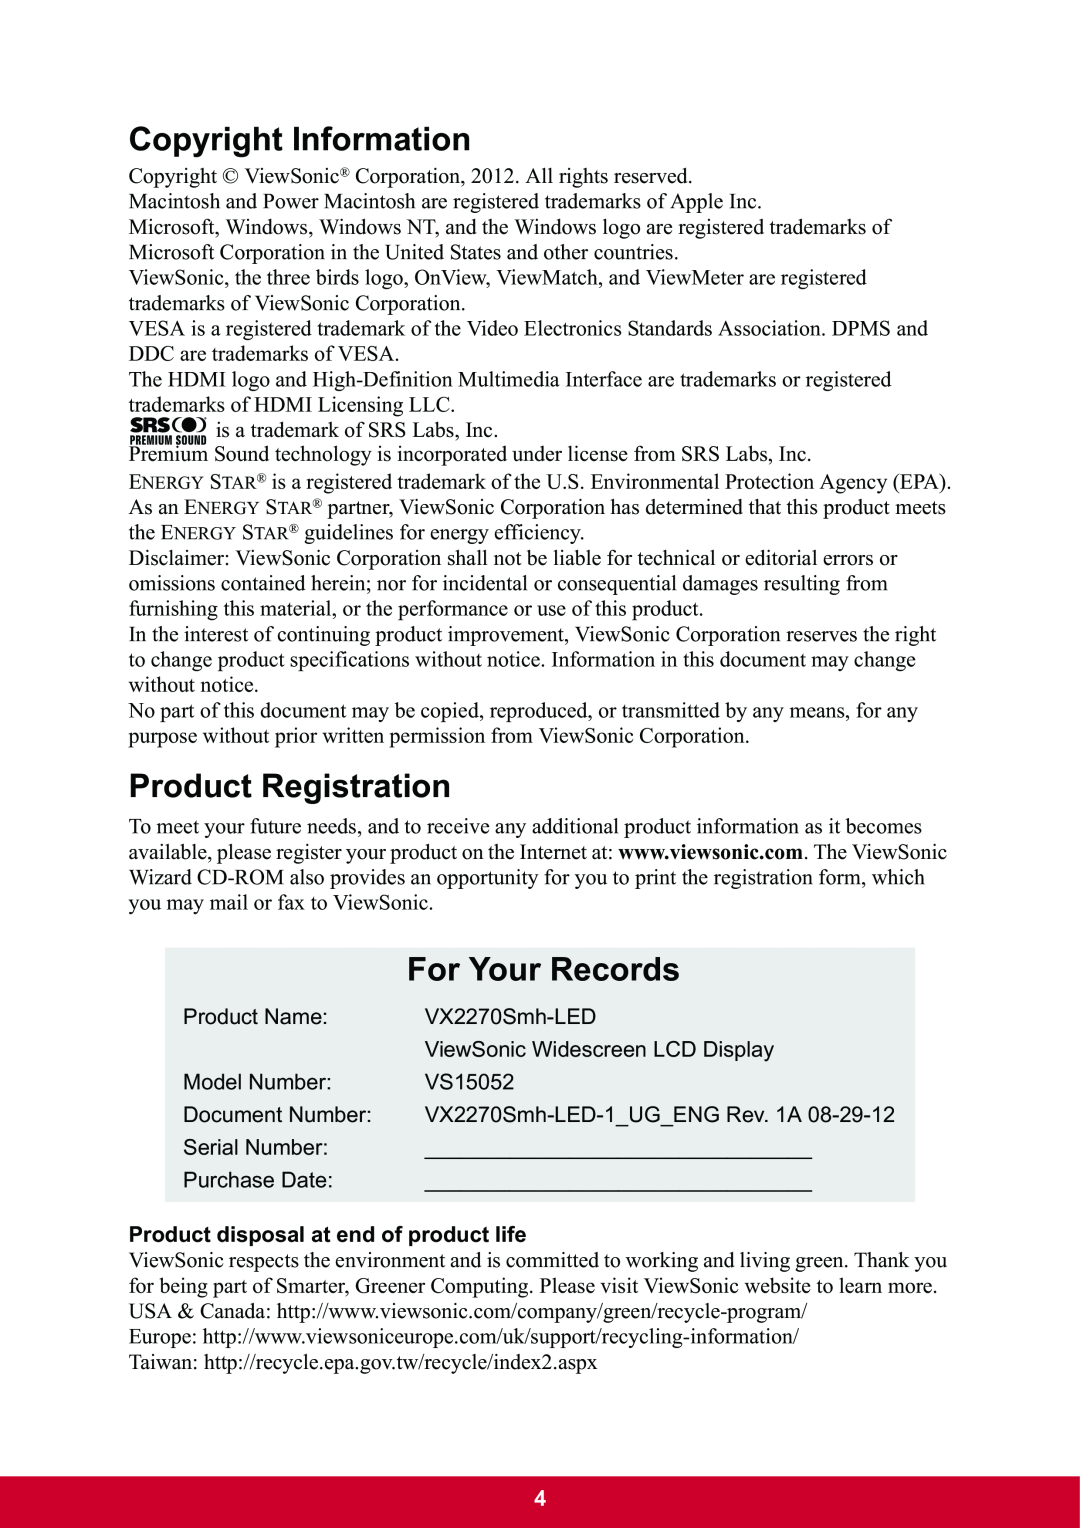 ViewSonic VX2270Smh-LED warranty Copyright Information, Product Registration, For Your Records 